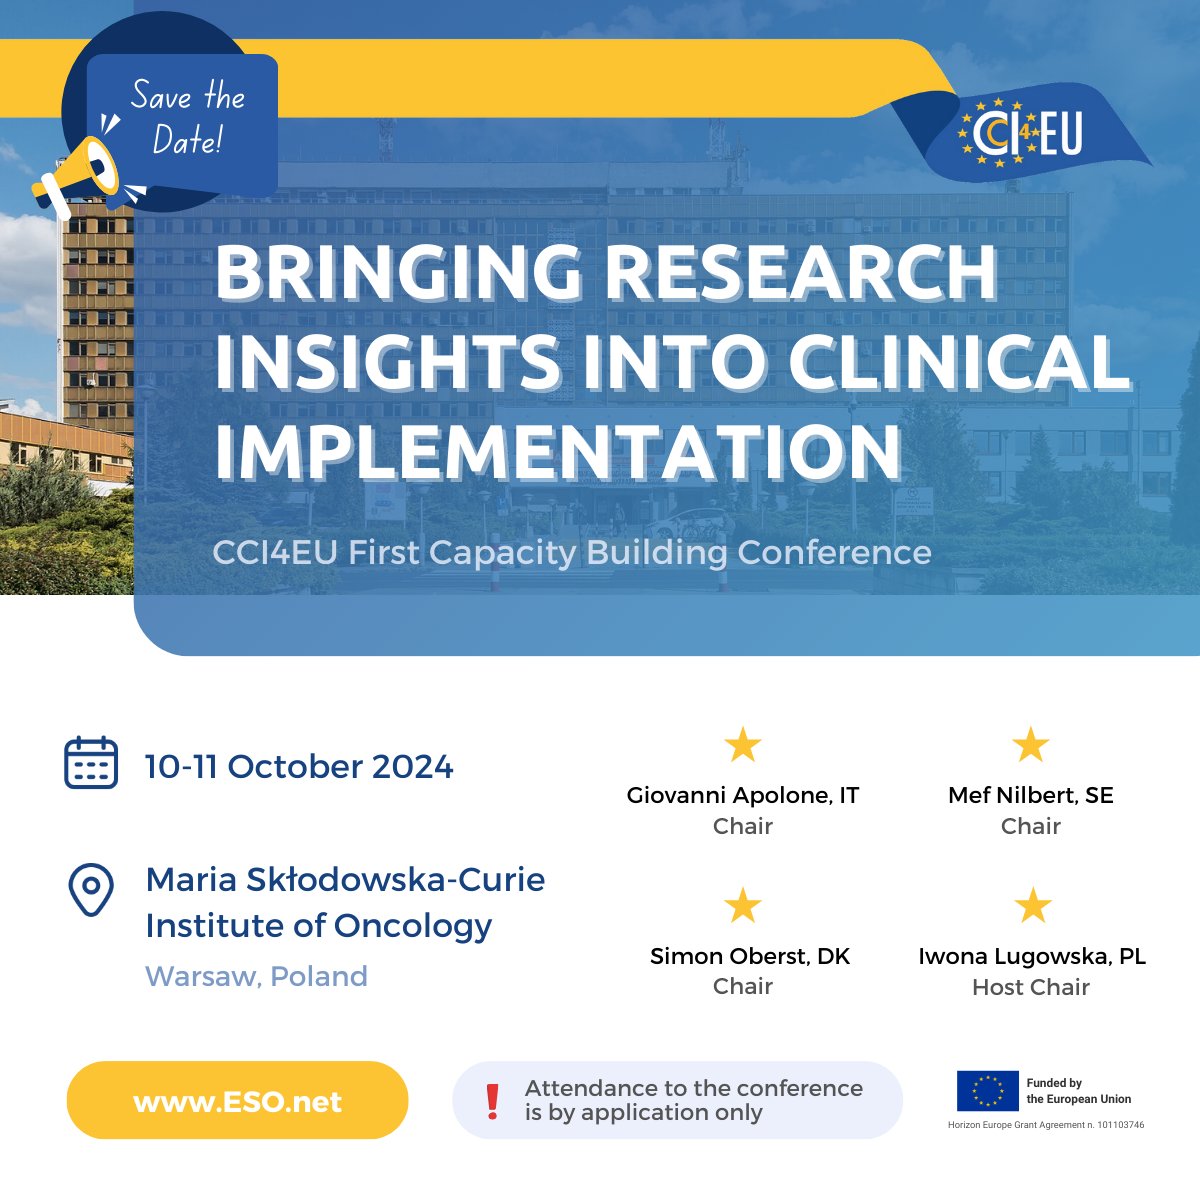 Join the first CCI4EU capacity building conference on 10-11 October 2024